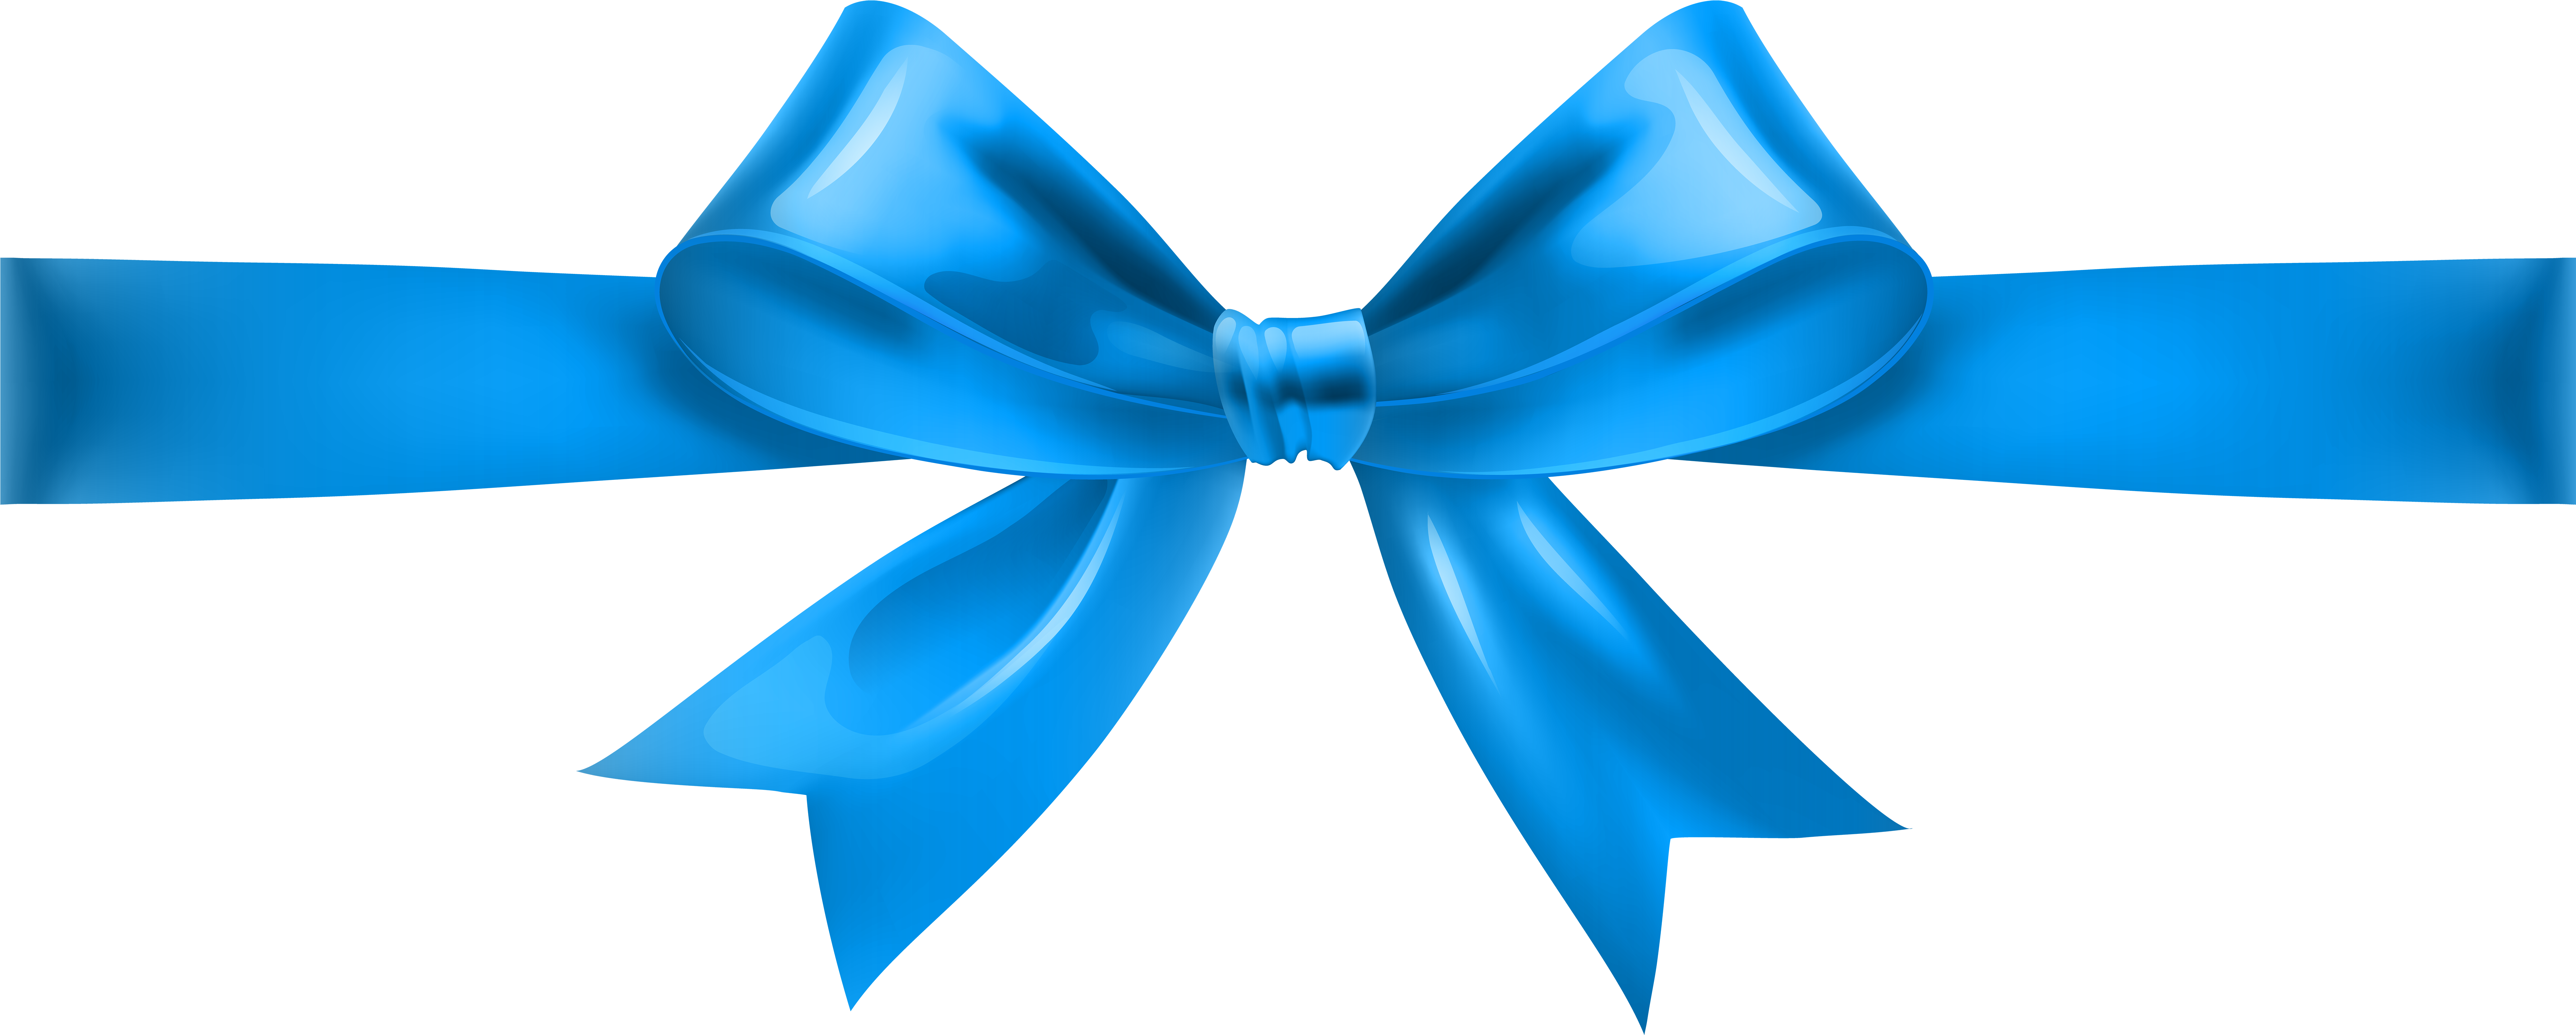 Blue Ribbon PNG Images, Download 4500+ Blue Ribbon PNG Resources